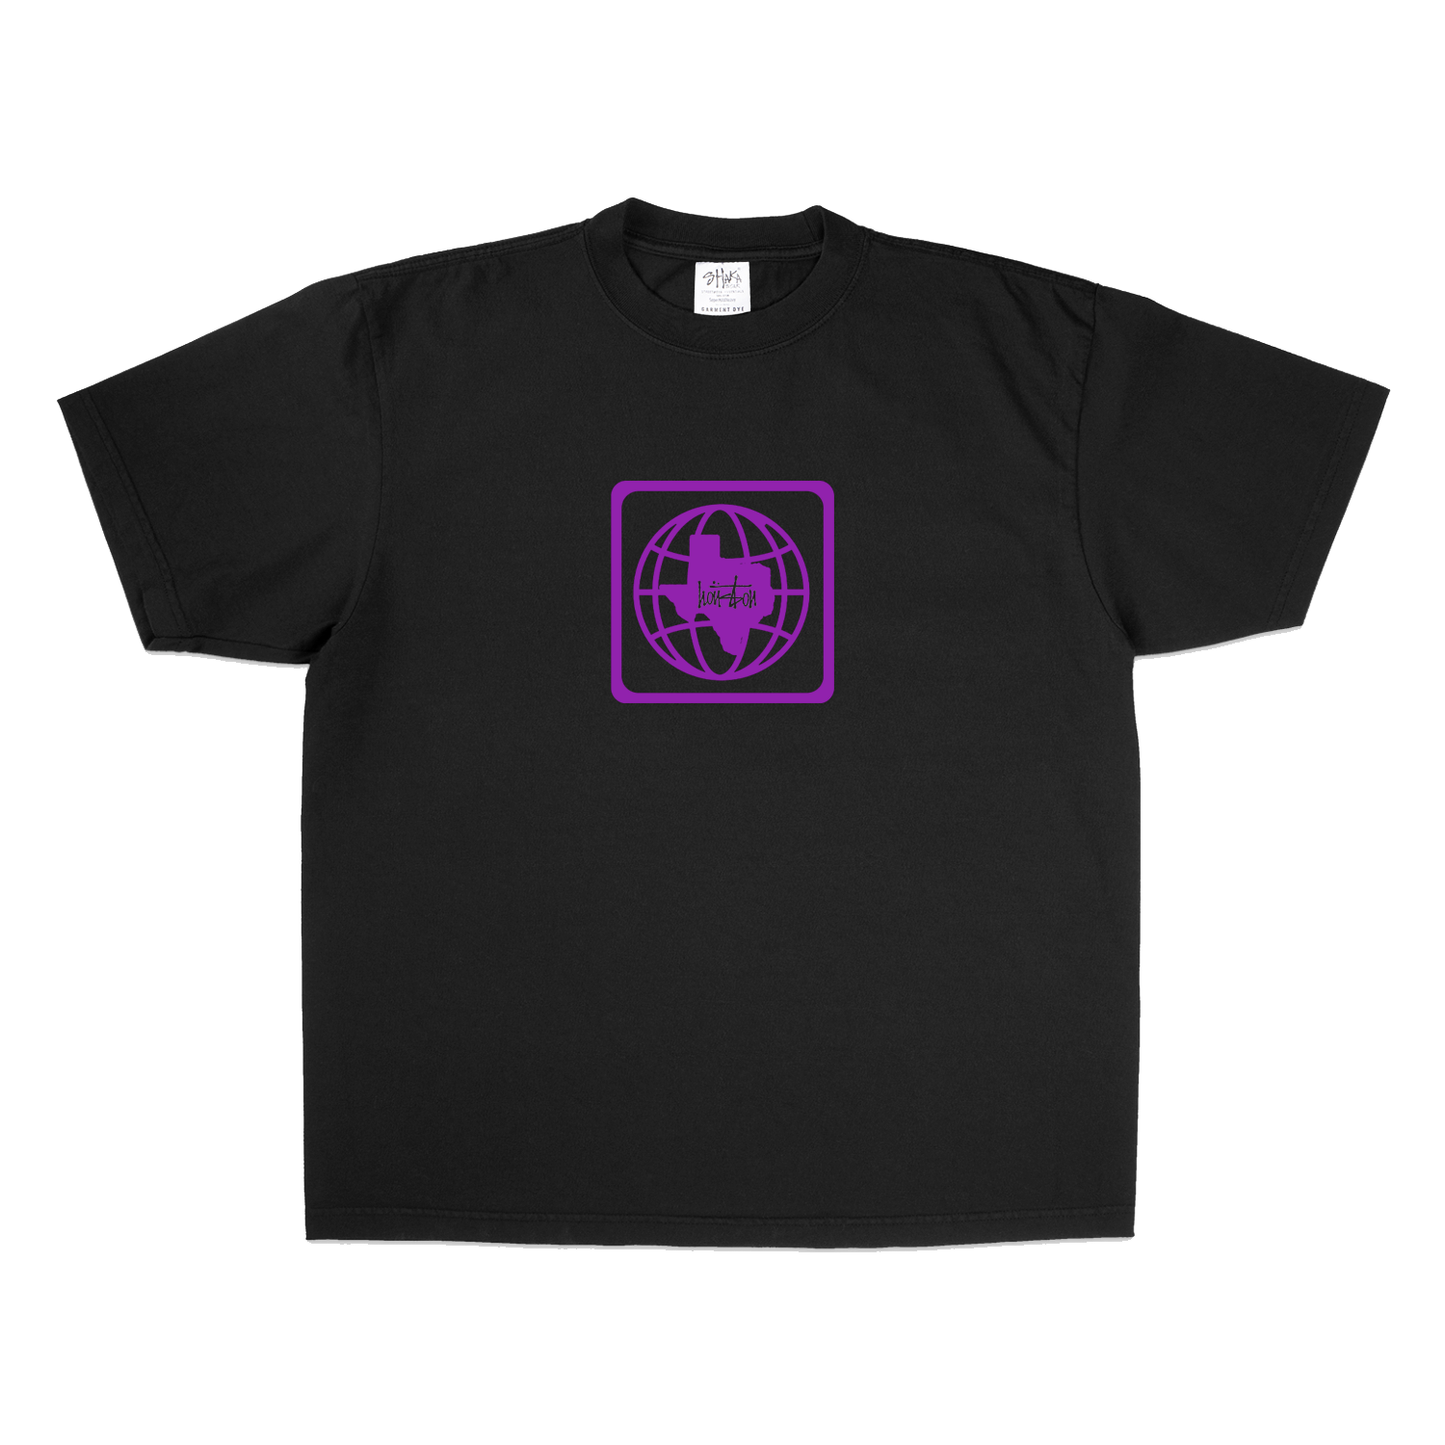 The City of Screw T-Shirt